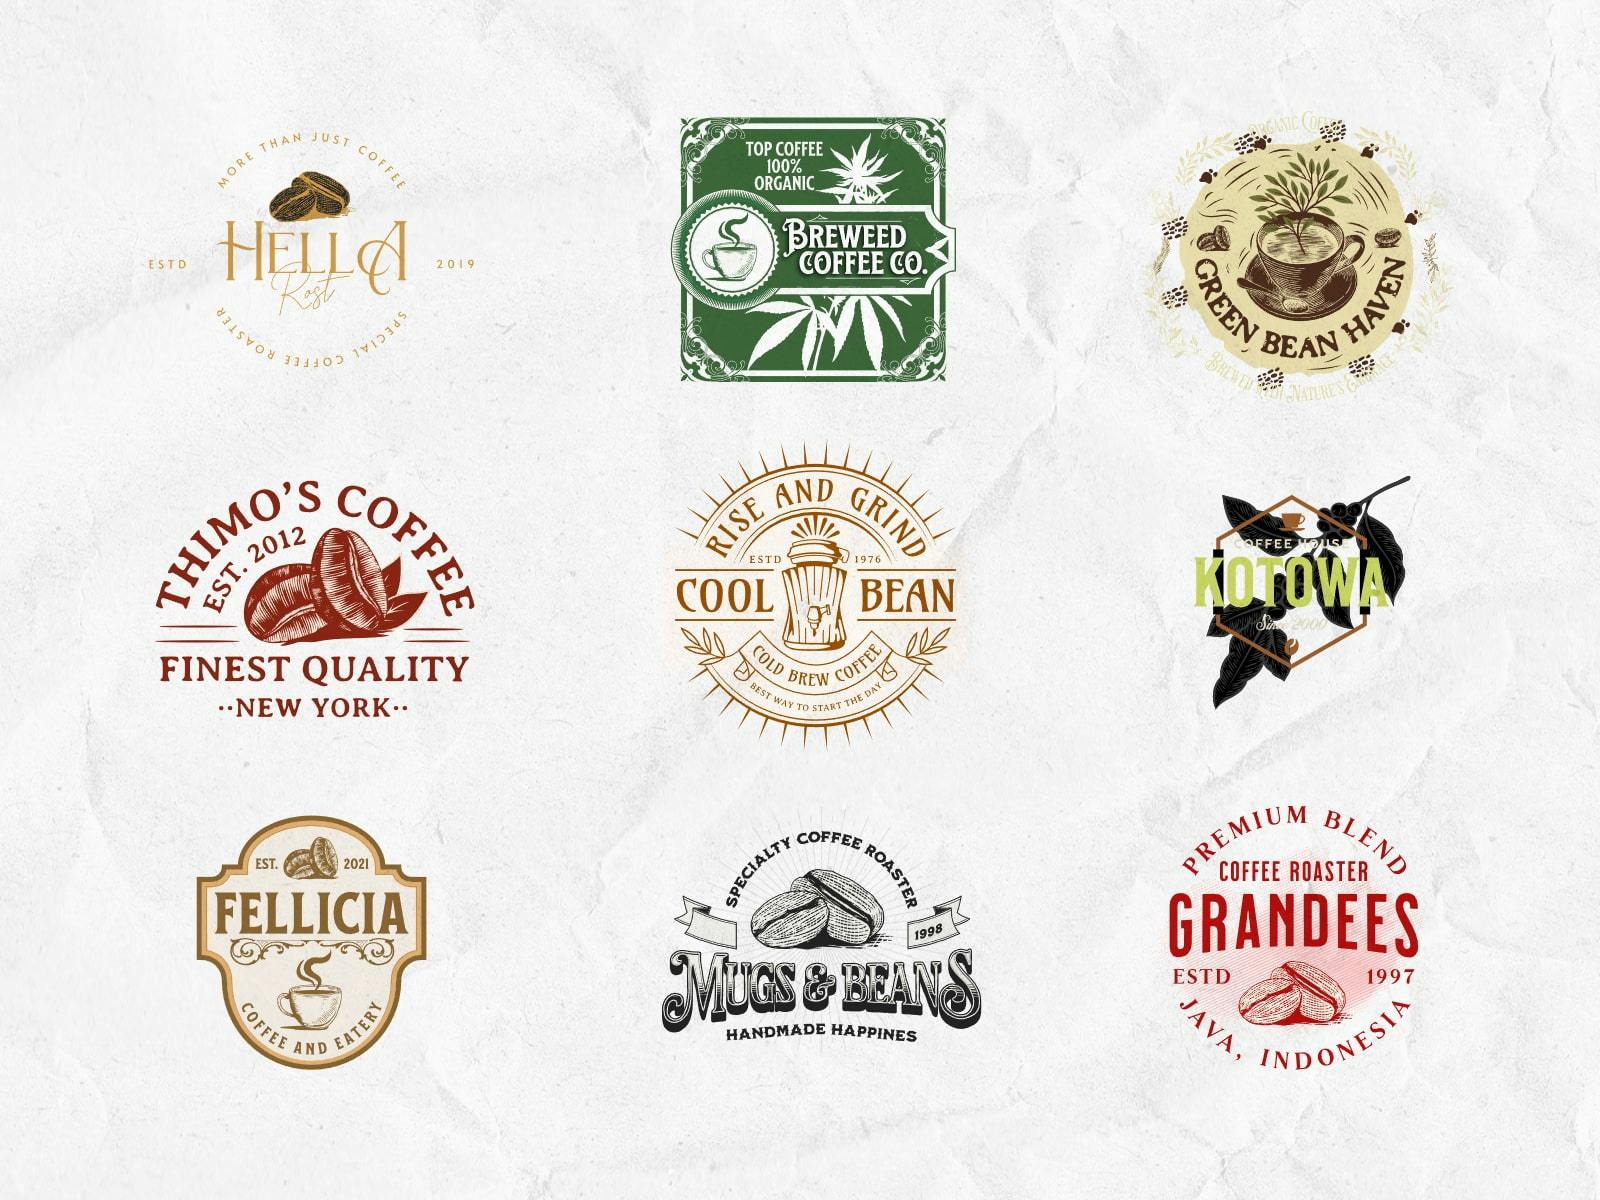 Hand-drawn Coffee Shop Logos: Collection of hand-drawn coffee shop logos